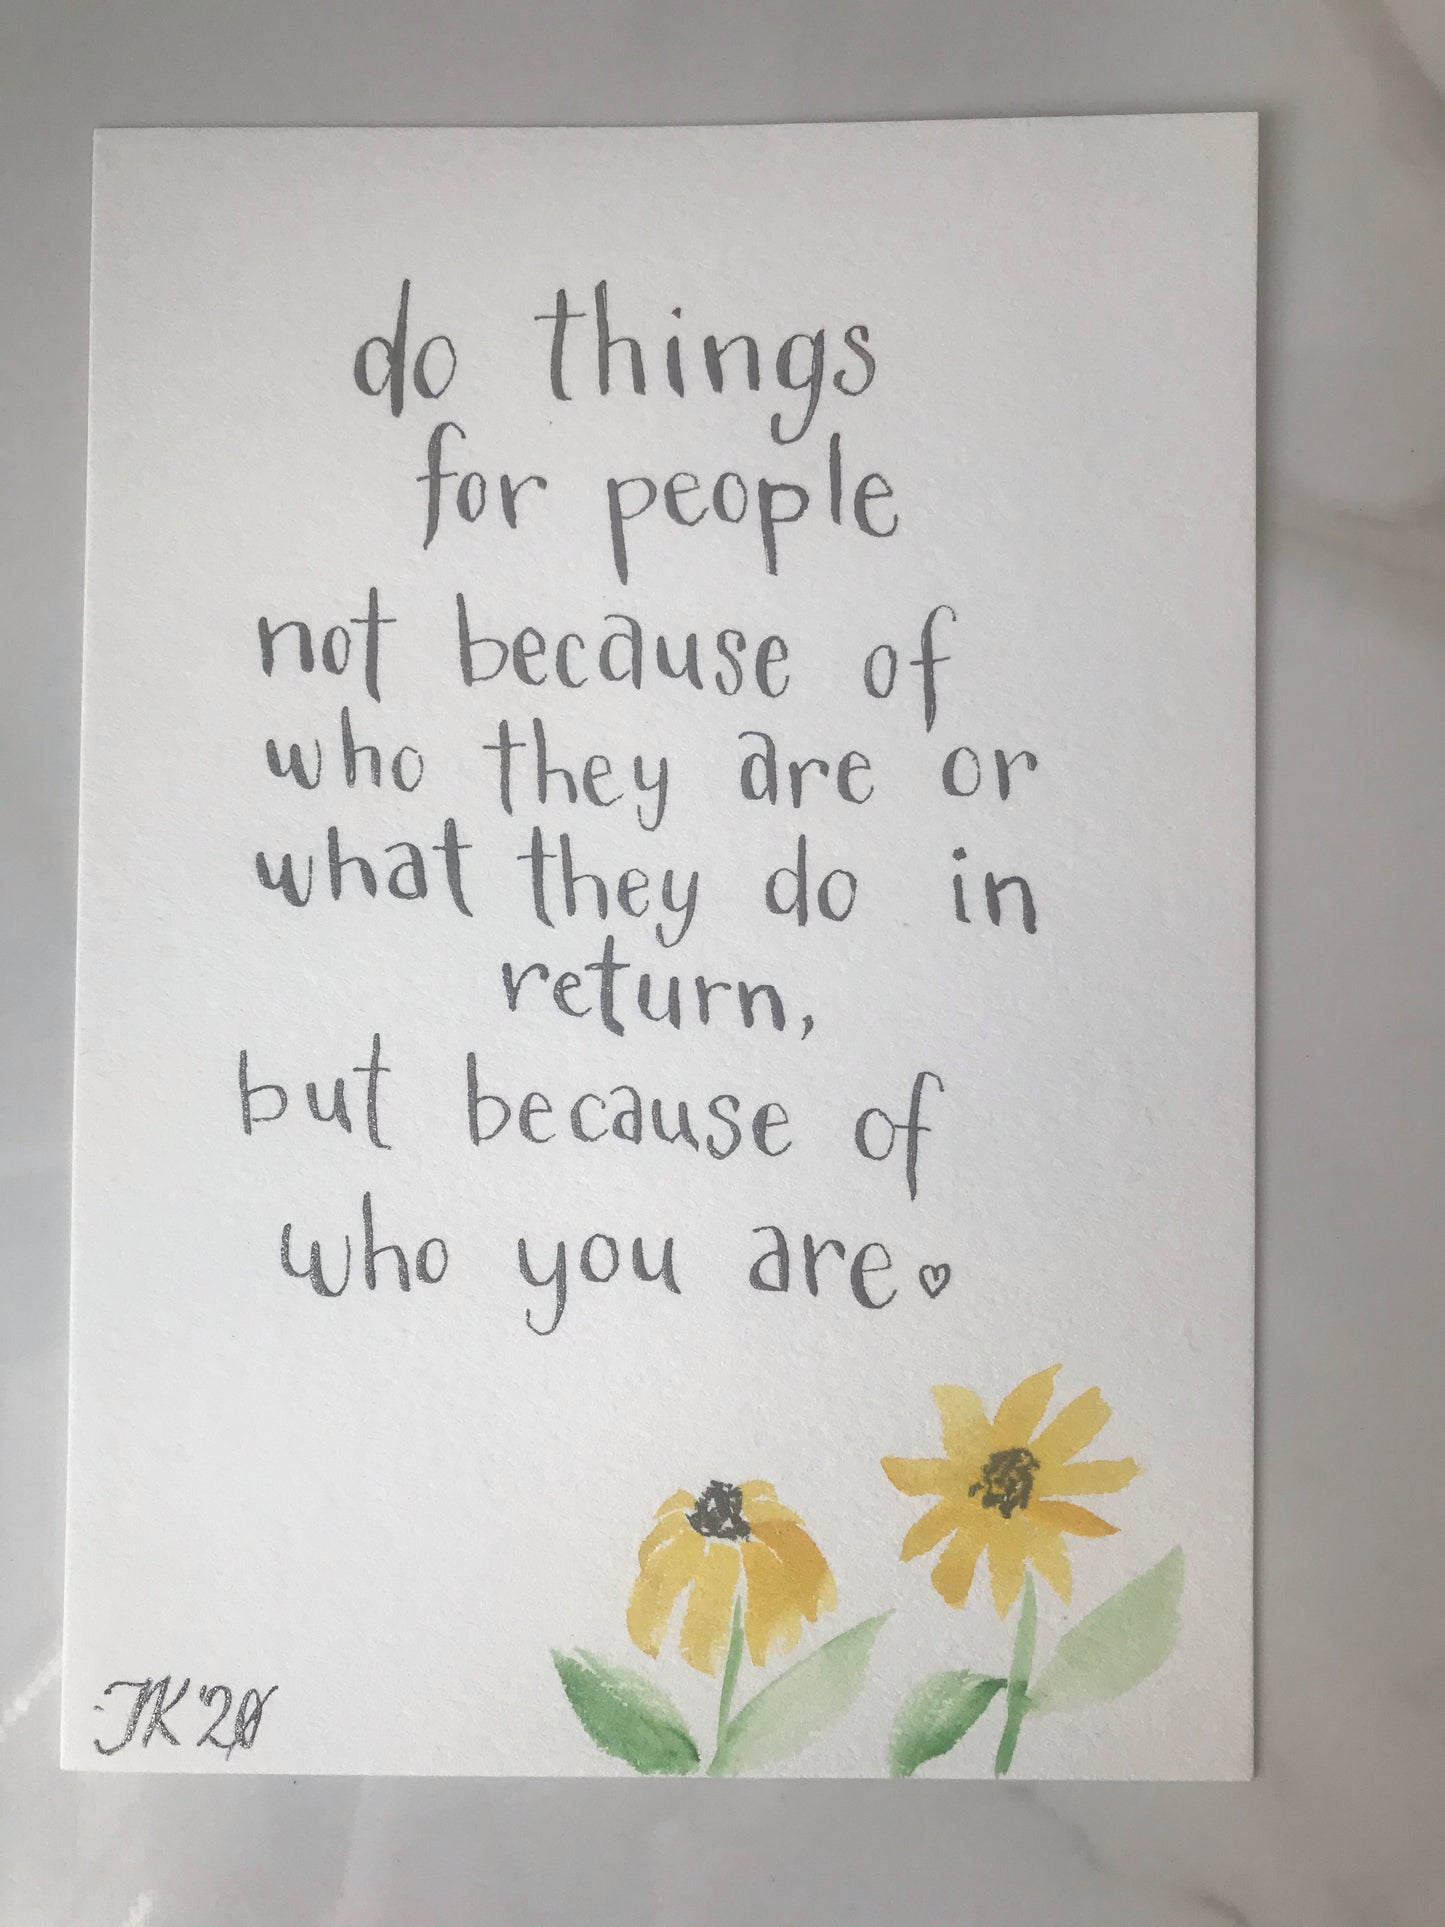 Kindness quote original watercolor painting 5”x7”